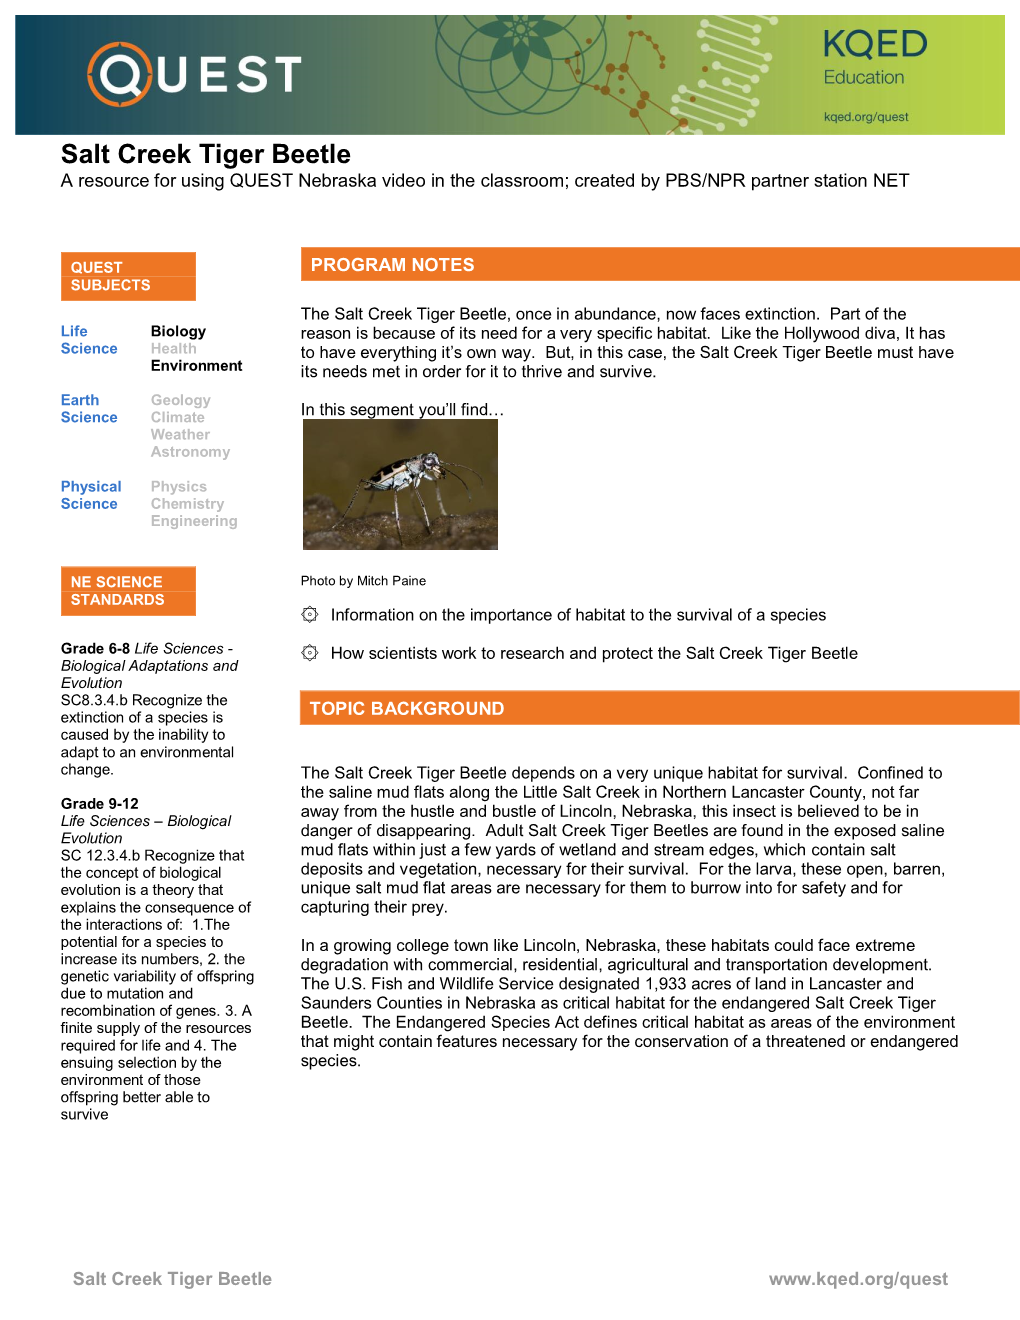 Salt Creek Tiger Beetle a Resource for Using QUEST Nebraska Video in the Classroom; Created by PBS/NPR Partner Station NET